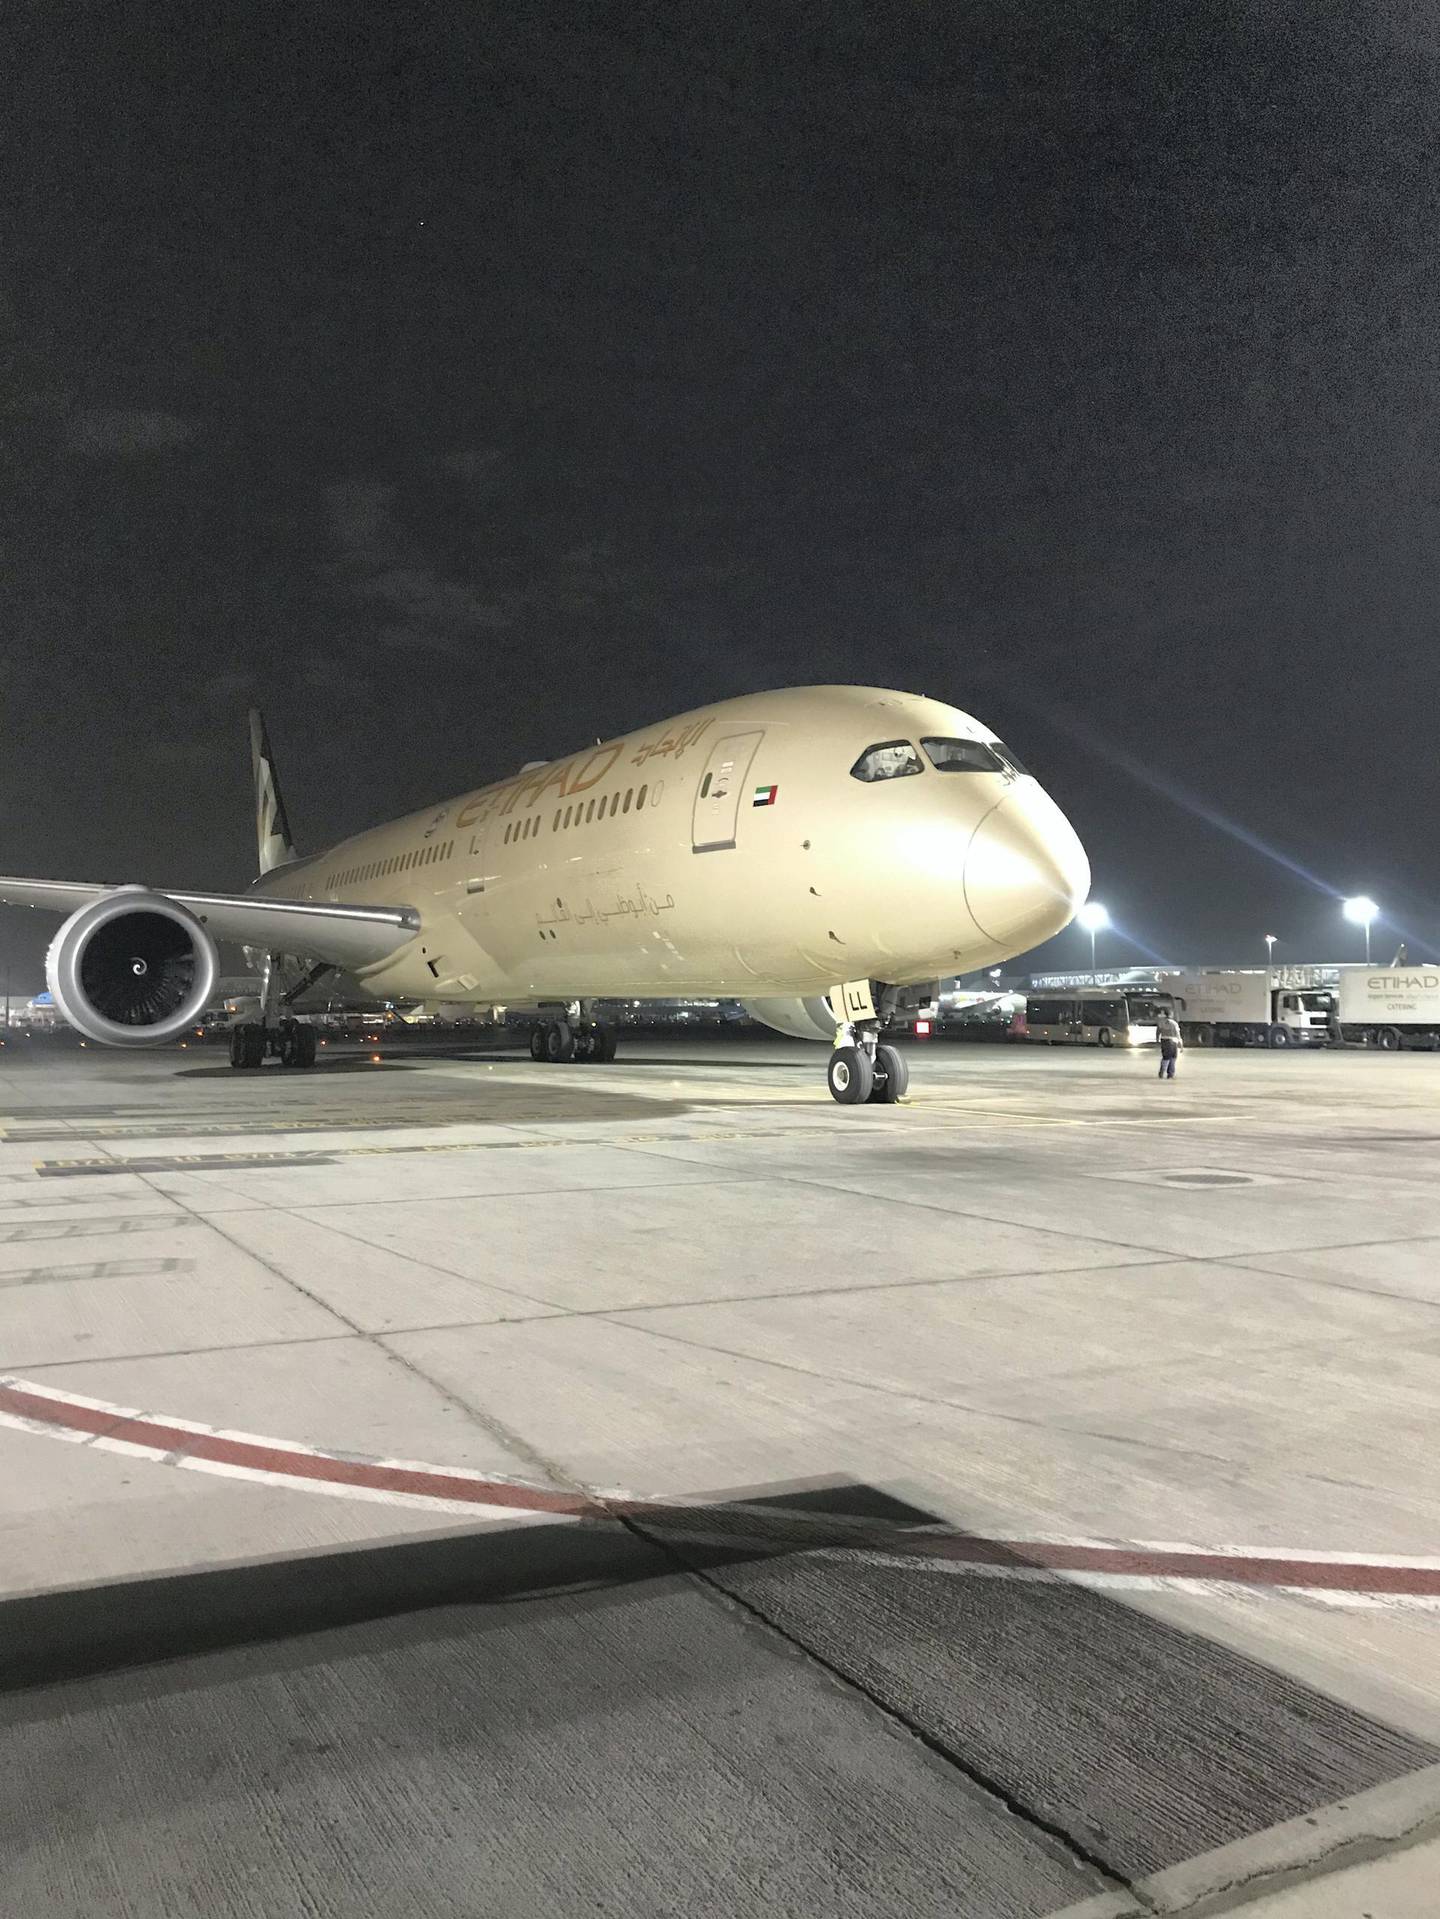  Etihad flight EY405 from Bangkok at Abu Dhabi International Airport. Passengers cannot disembark until their temperatures have been taken - the first step in a web of measures designed to limit the spread of Covid-19. 